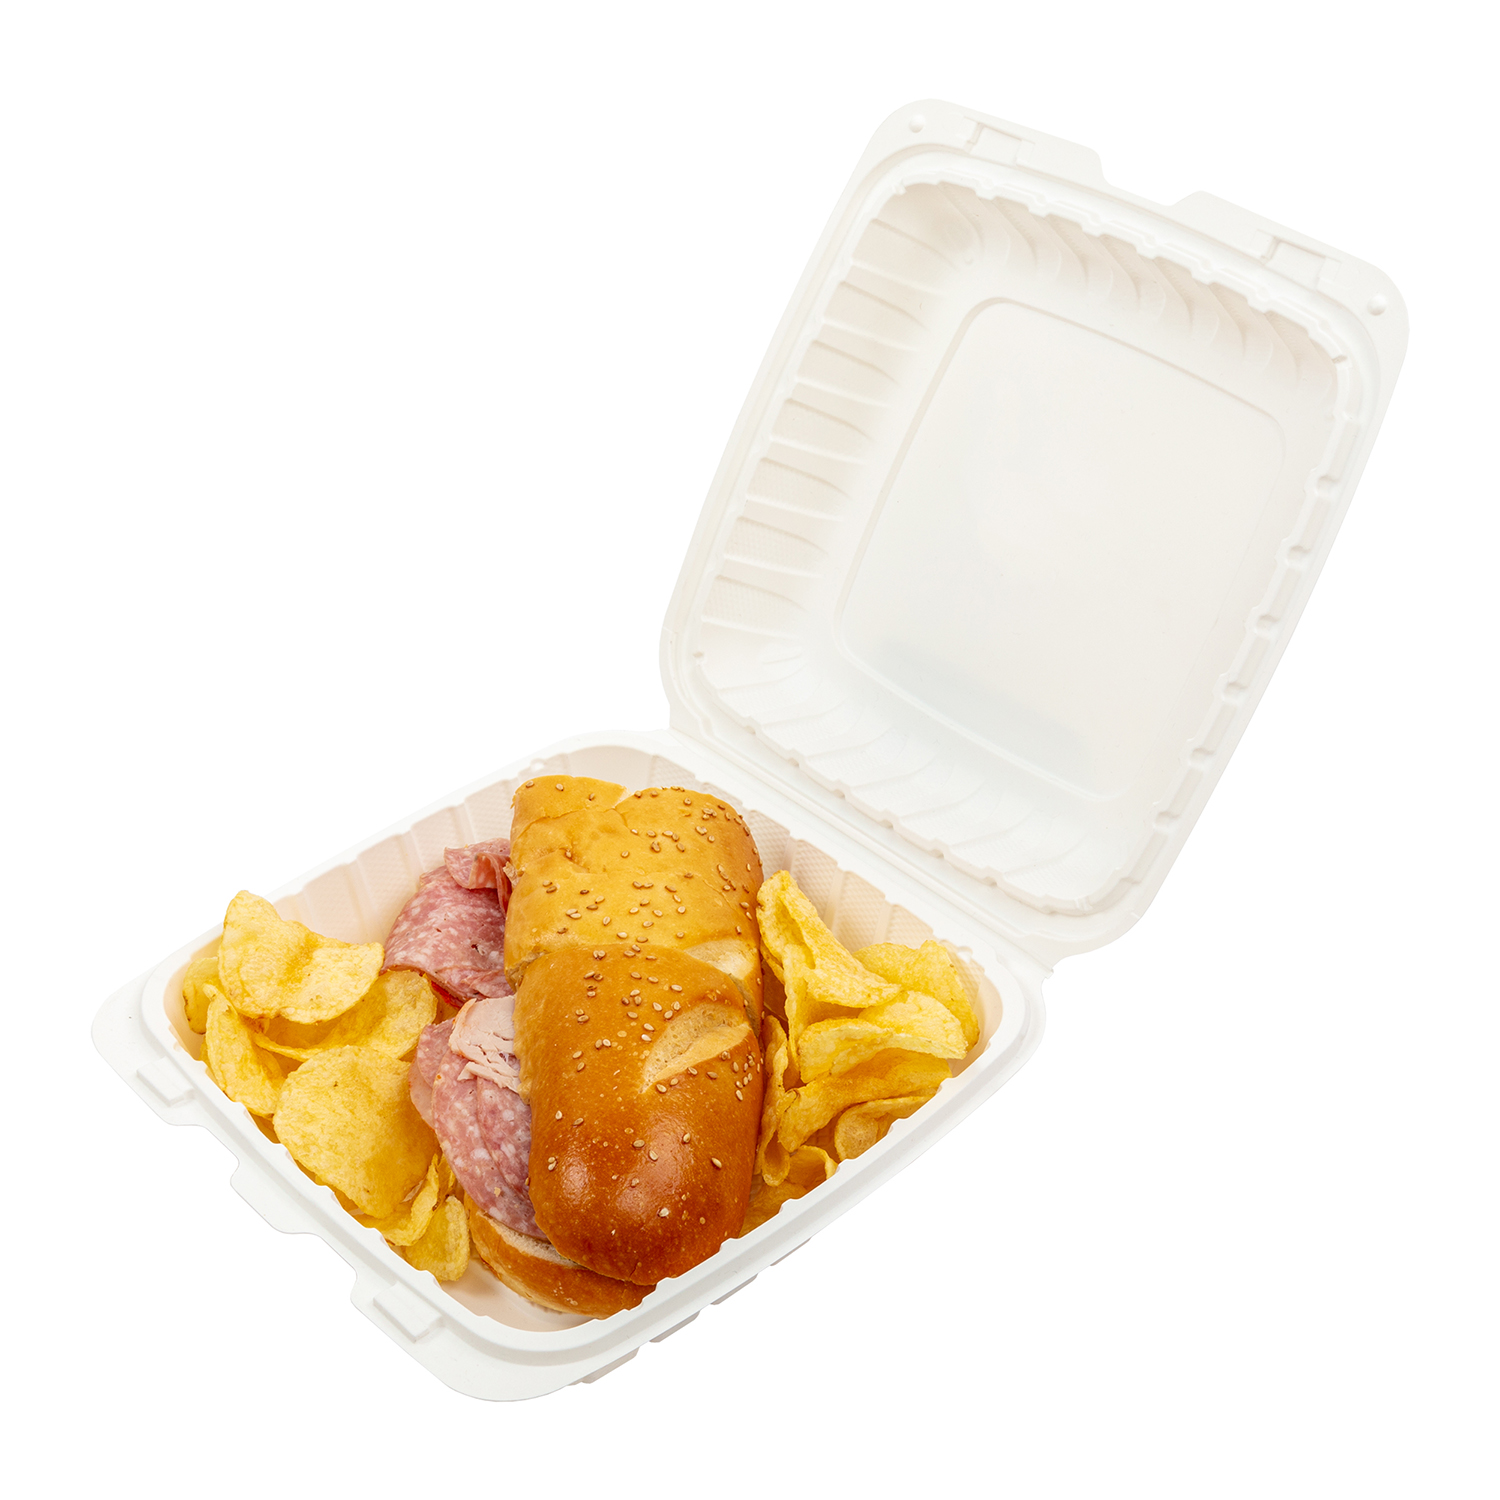 Small Medium Large Polystyrene Foam Food Containers Takeaway Box Hinged lid BBQ 